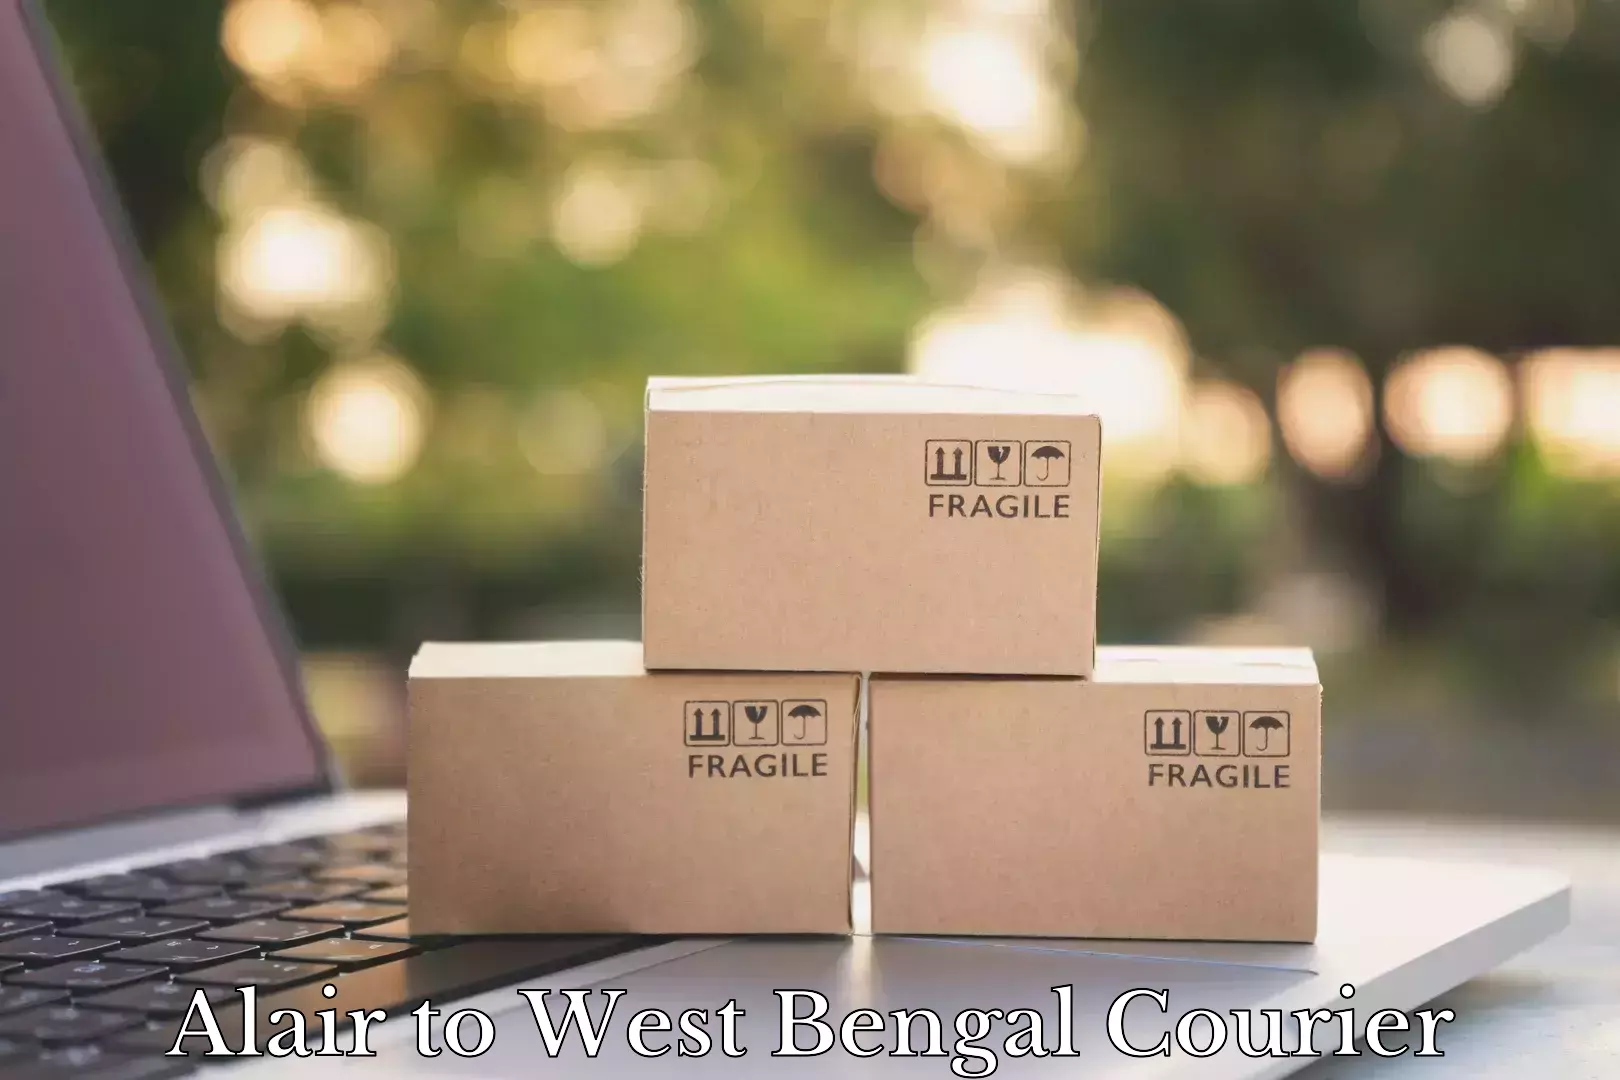 Professional moving company Alair to West Bengal